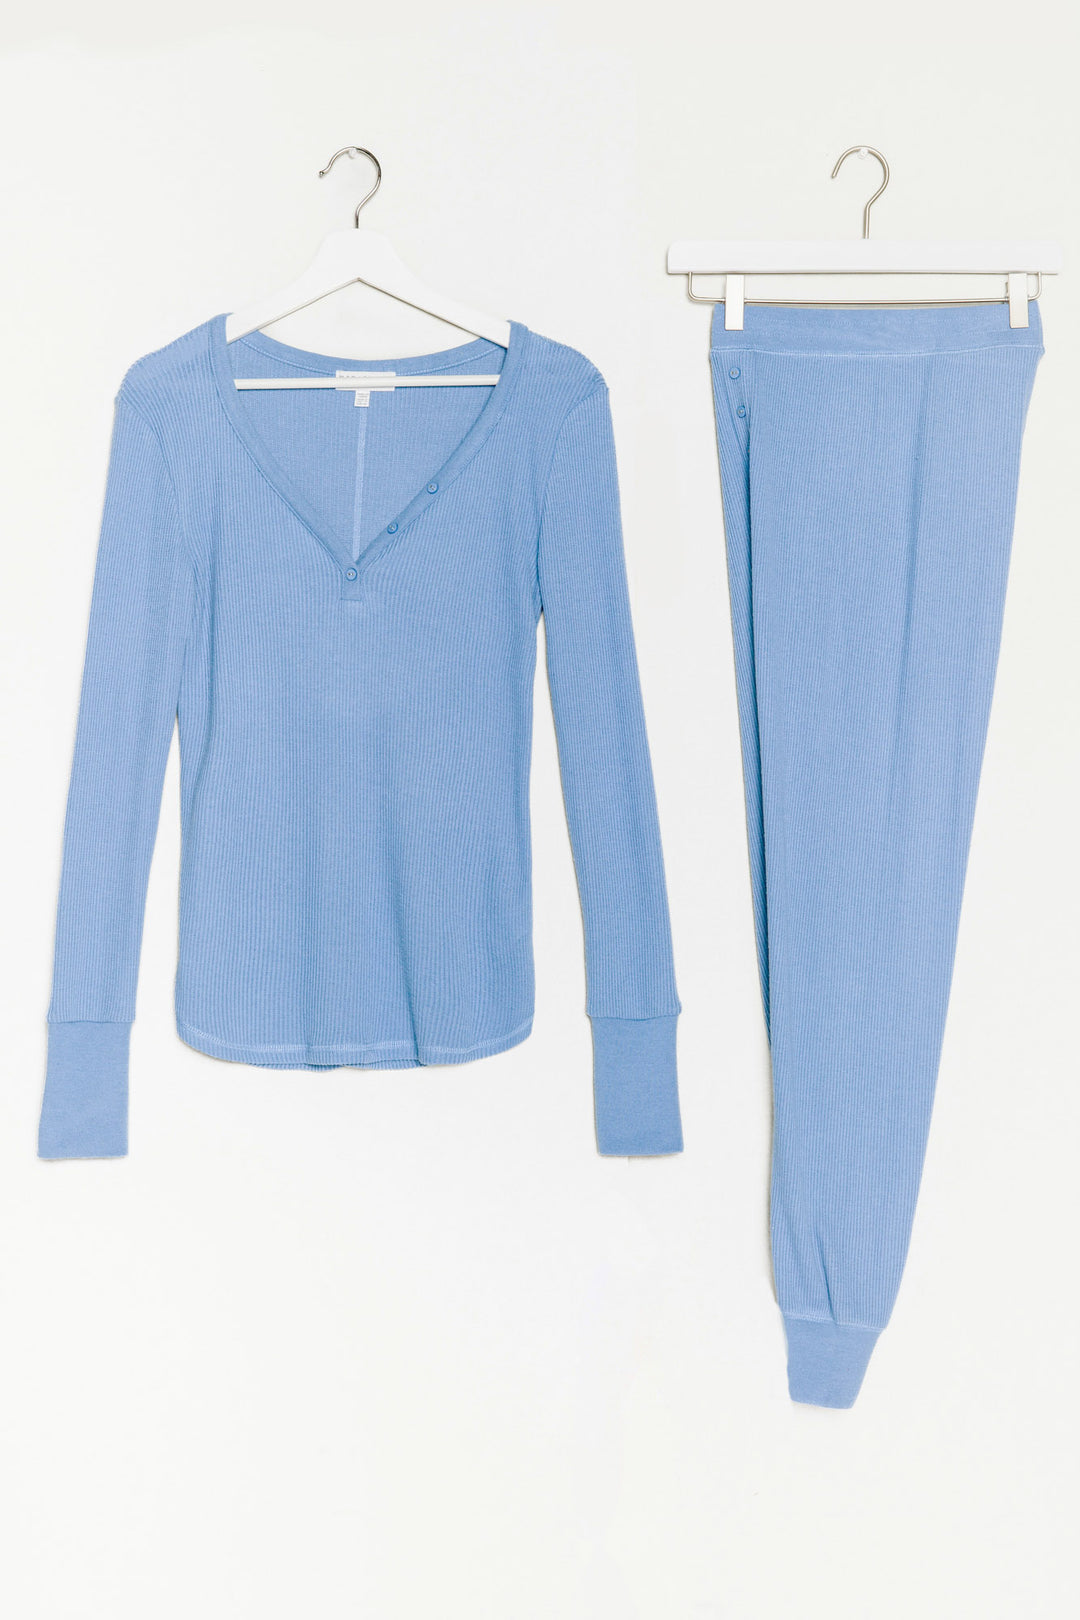 Henley top & jammie pant lounge set in soft 2x2 peachy rib in French blue. (6853541527652)